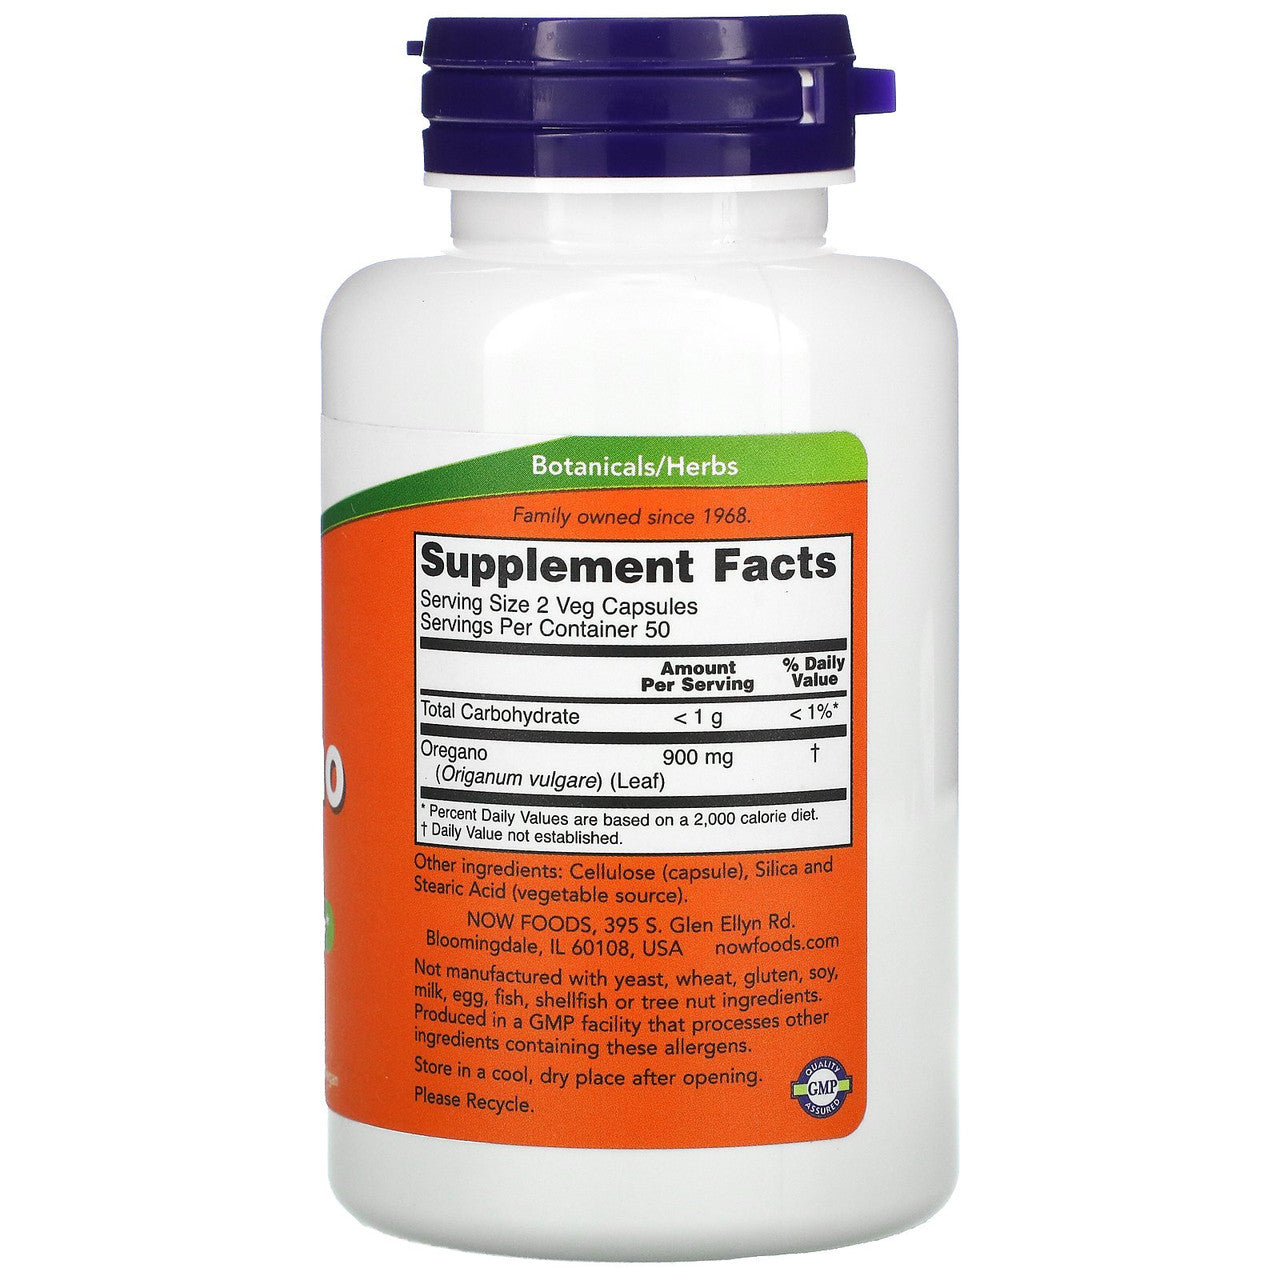 Now Oregano 450mg Supplement Facts Label